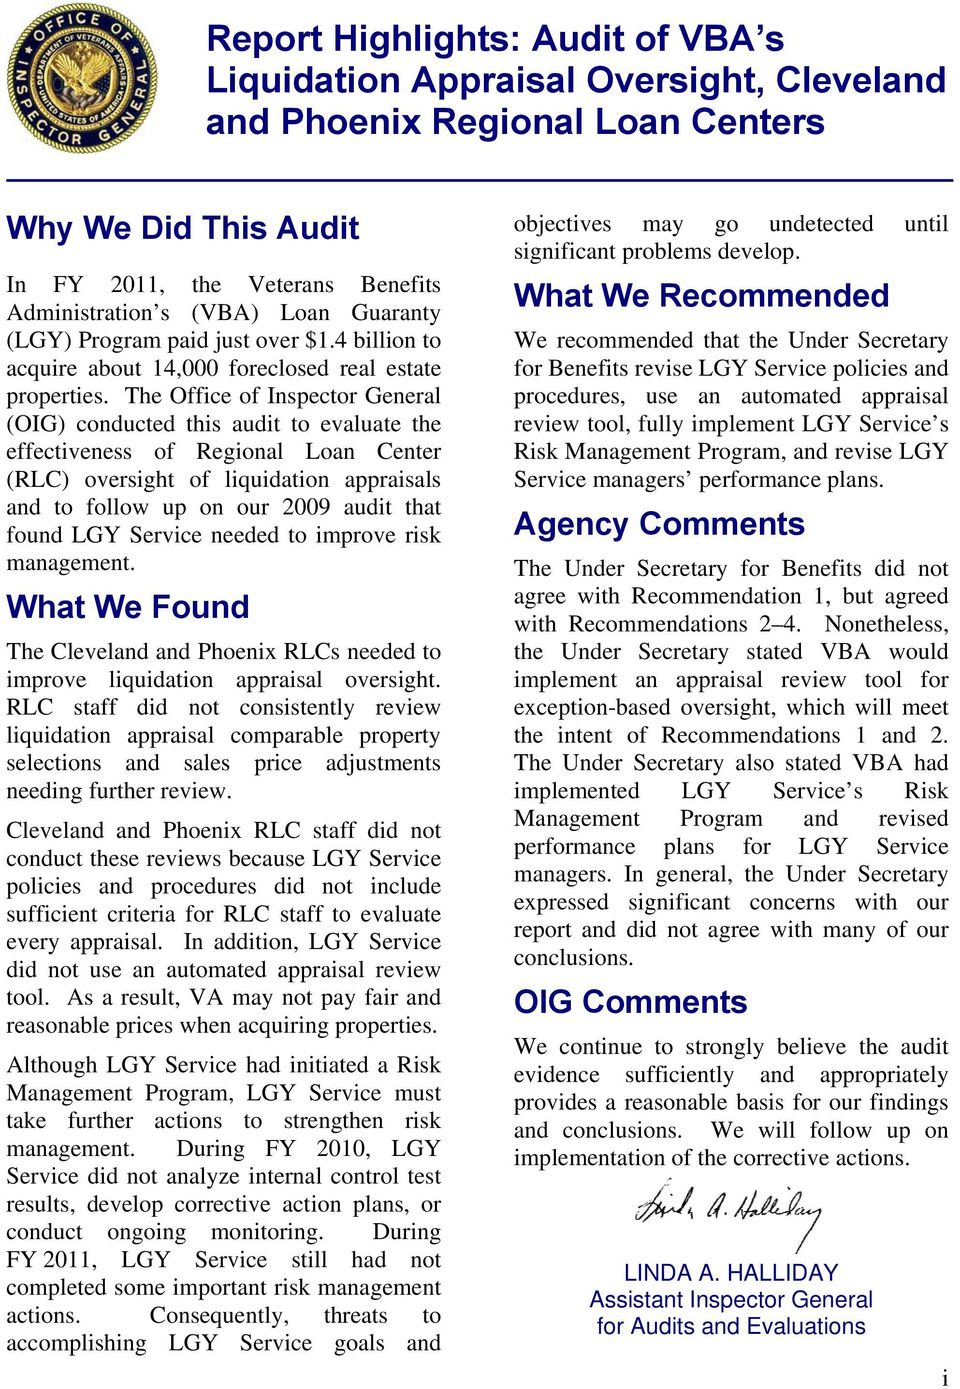 The Office of Inspector General (OIG) conducted this audit to evaluate the effectiveness of Regional Loan Center (RLC) oversight of liquidation appraisals and to follow up on our 2009 audit that